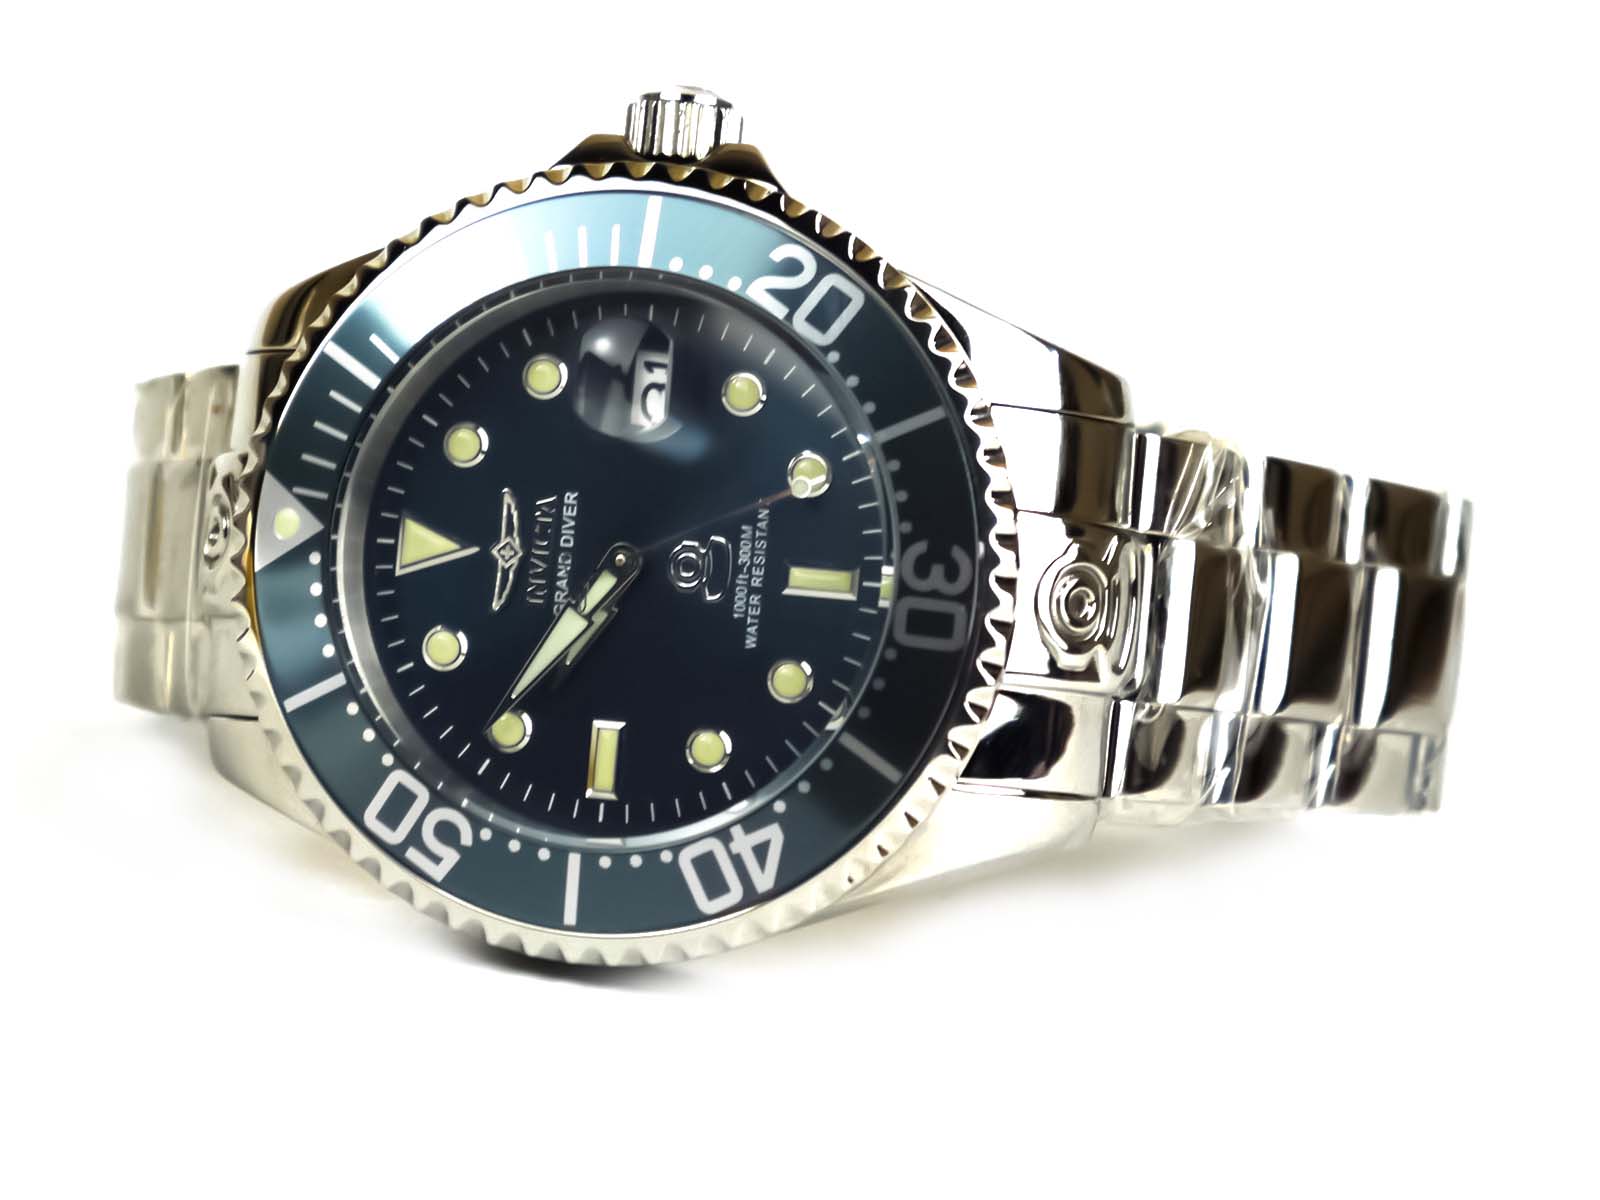  Invicta Men's 18160 Pro Diver Analog Japanese Automatic  Stainless Steel Watch : Invicta: Clothing, Shoes & Jewelry